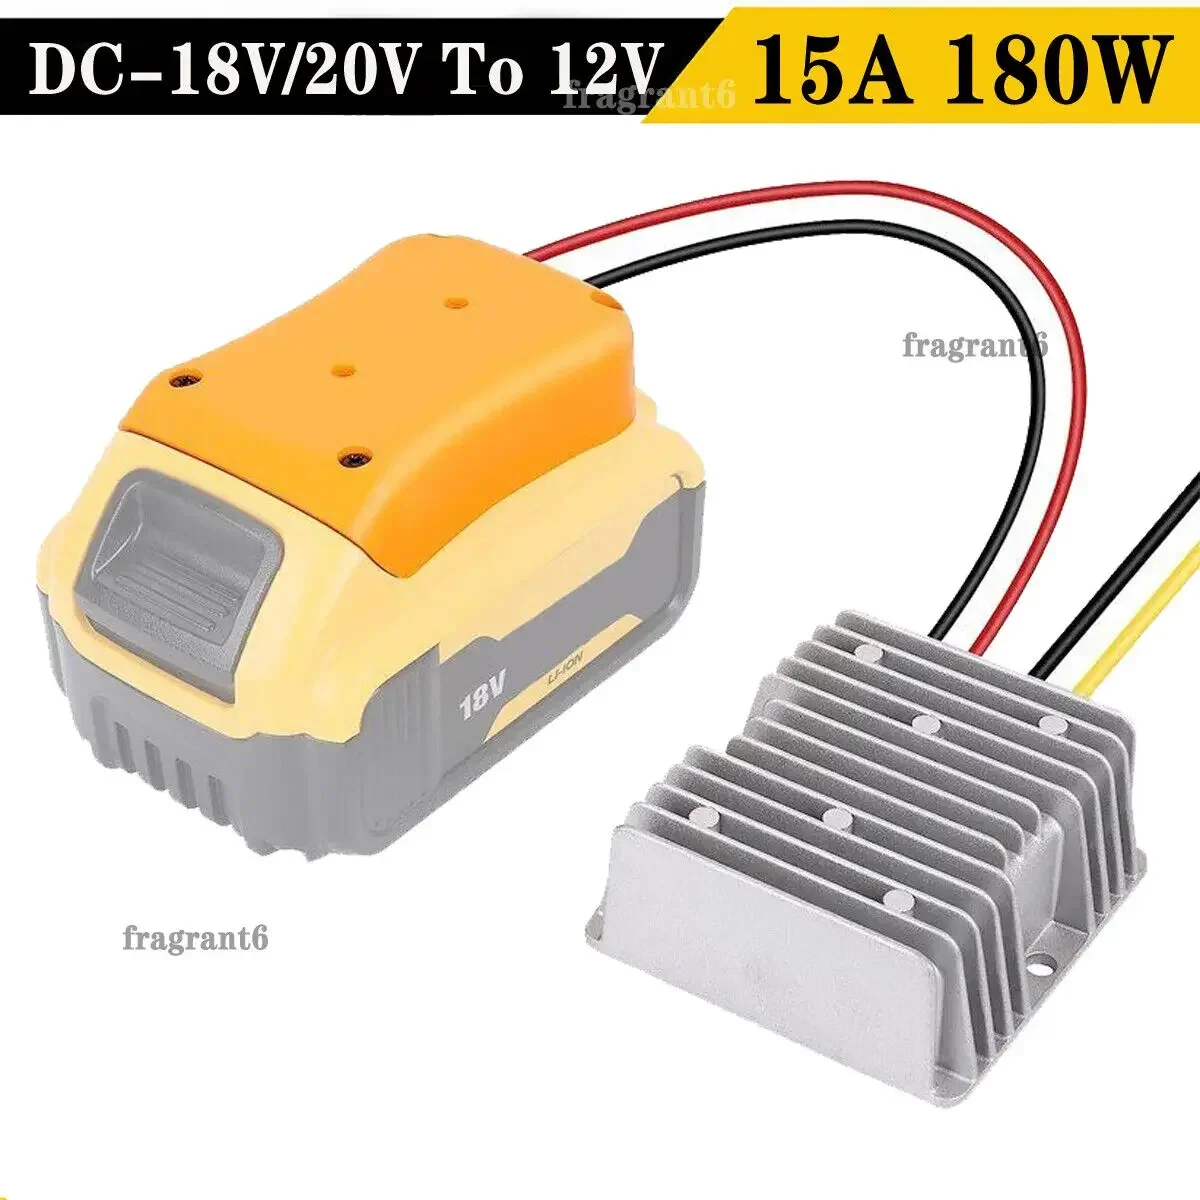 Step Down Converter 20V To 12V Adapter for Dewalt 20V Li-ion Battery 15A 180W Adapter Automatic Buck Boost Converter Regulator automatic battery charger fast car charger 12v 24v battery charger automotive battery charger auto battery charger five level